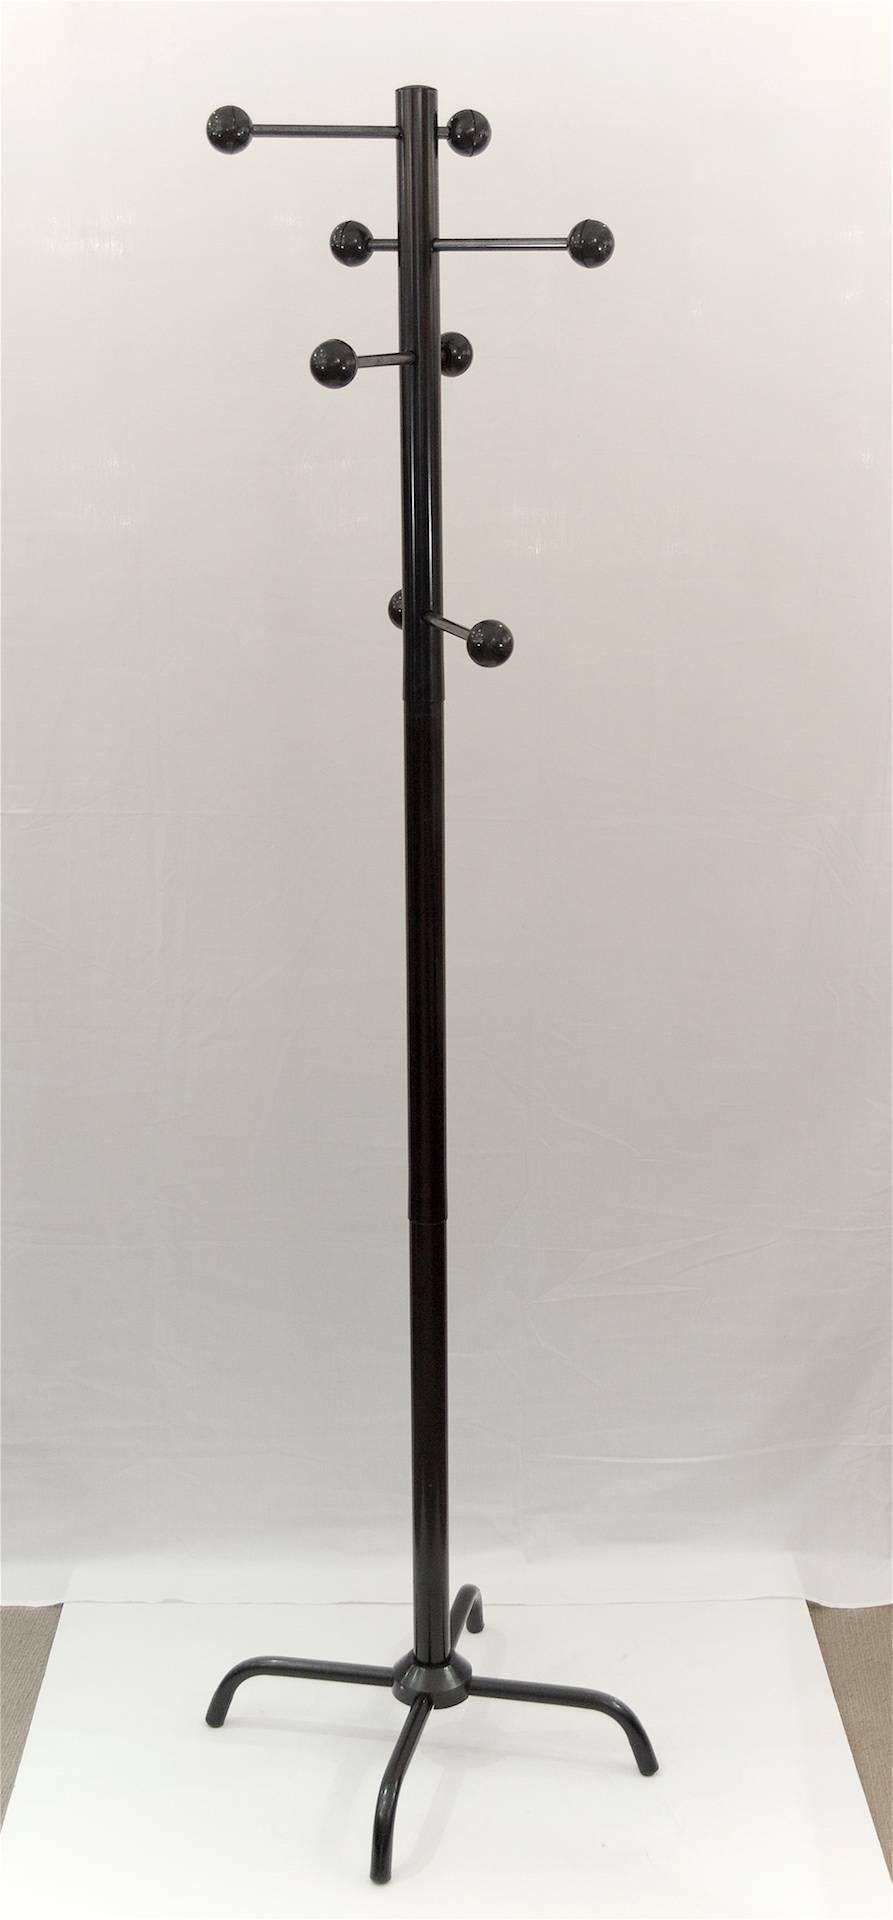 Black enameled metal Mid-Century Modern Italian coat tree. Arms slide through post for varying depth. Balls at end of arms are plastic.

Also available in red on separate listing.